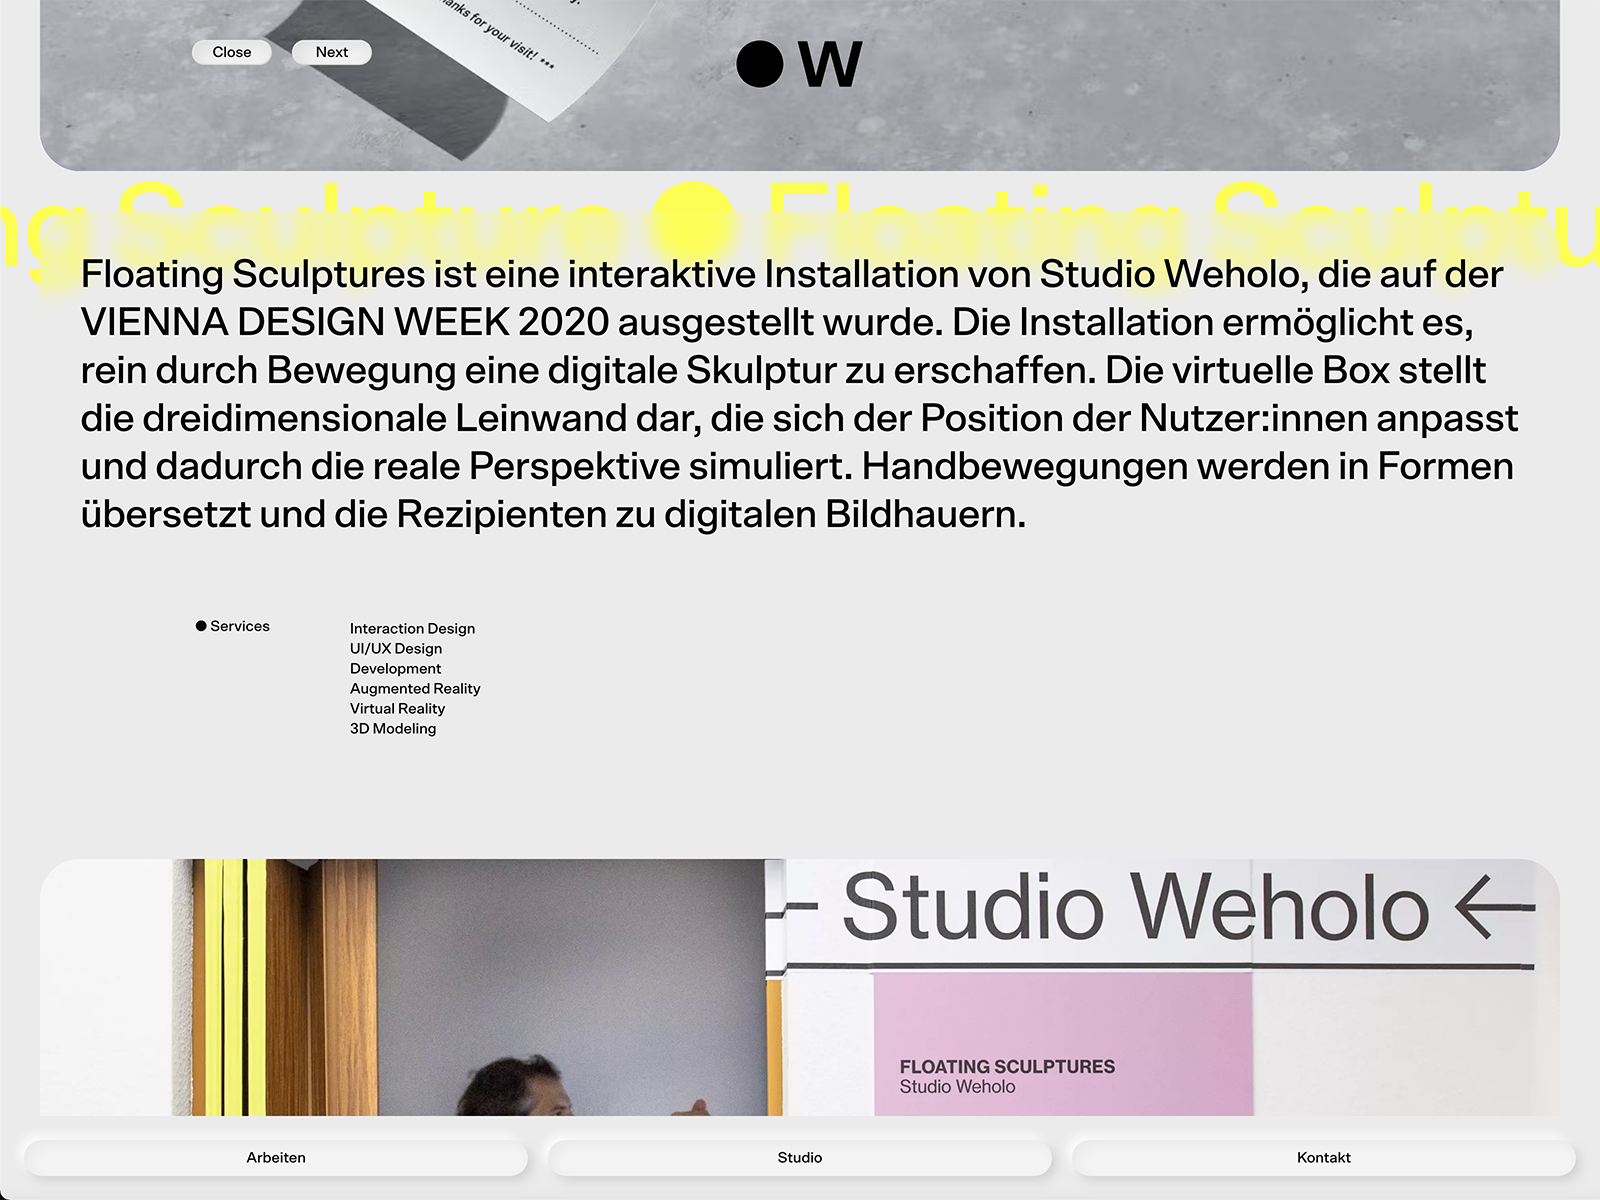 Studio Weholo projects